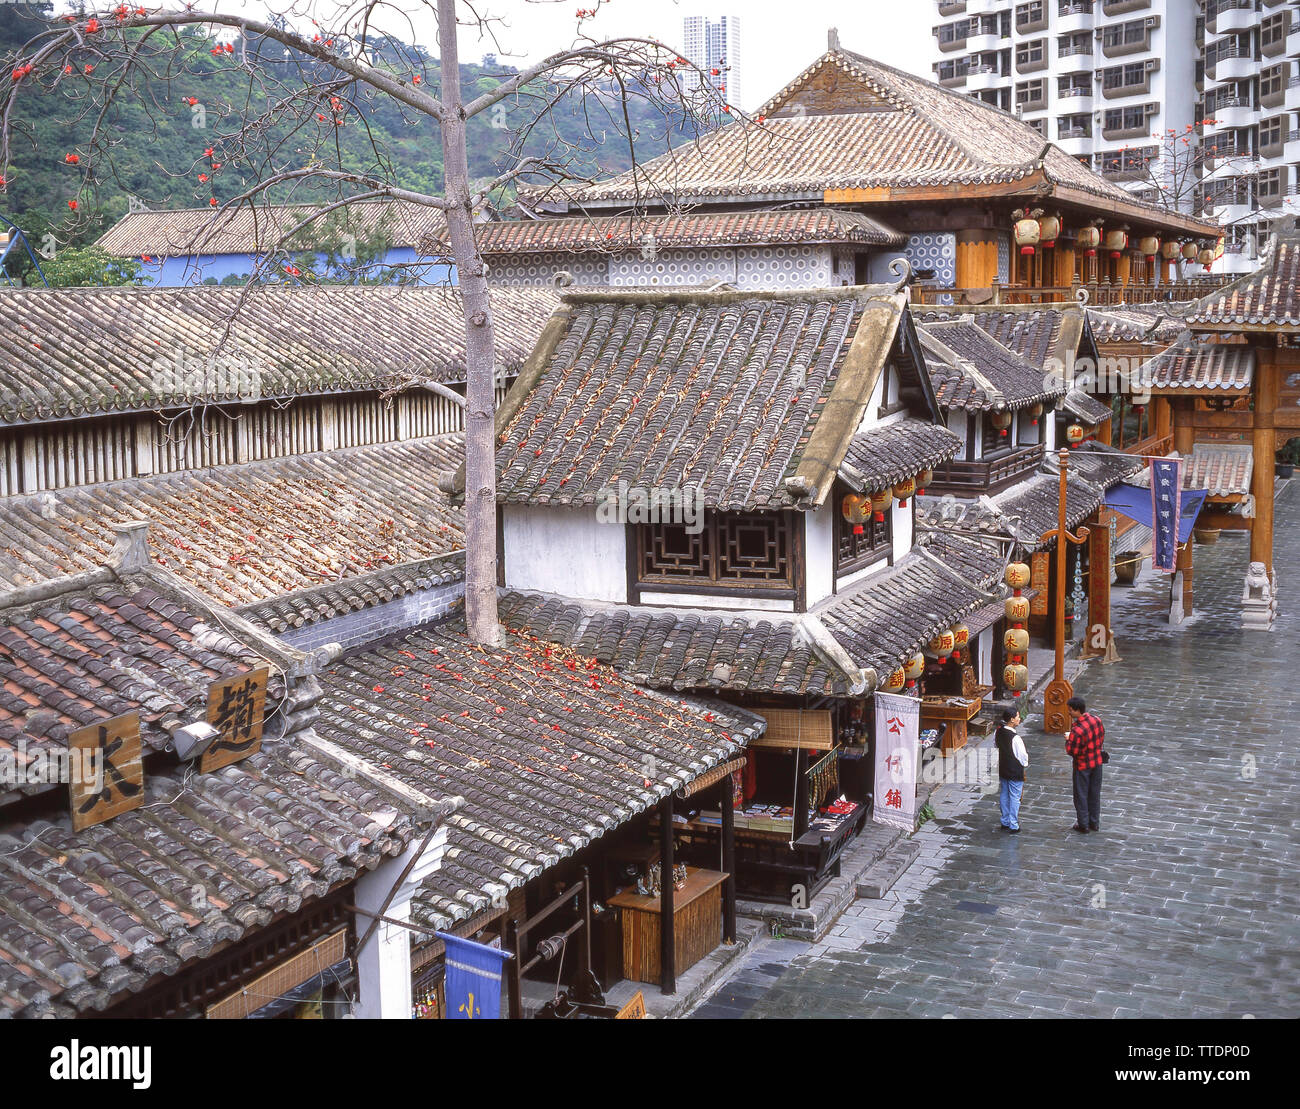 Traditional buildings, Sung Dynasty Village, Kowloon, Hong Kong, People's Republic of China Stock Photo